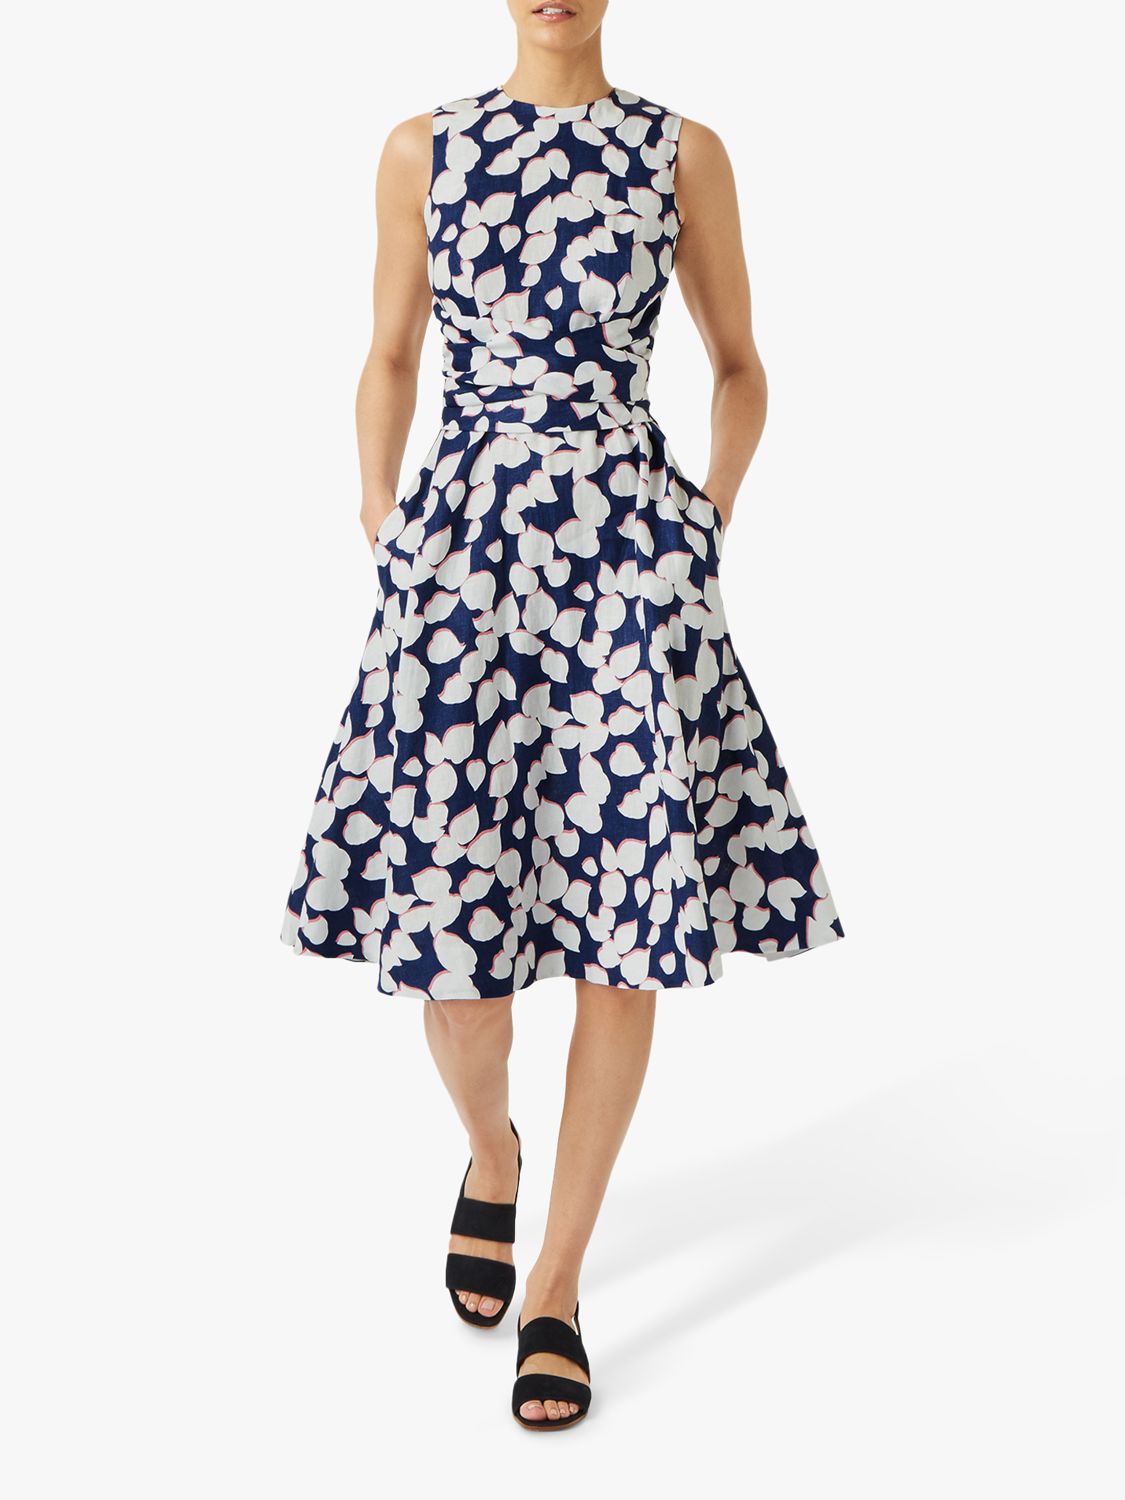 Hobbs Linen Twitchill Floral Midi Dress, French Navy